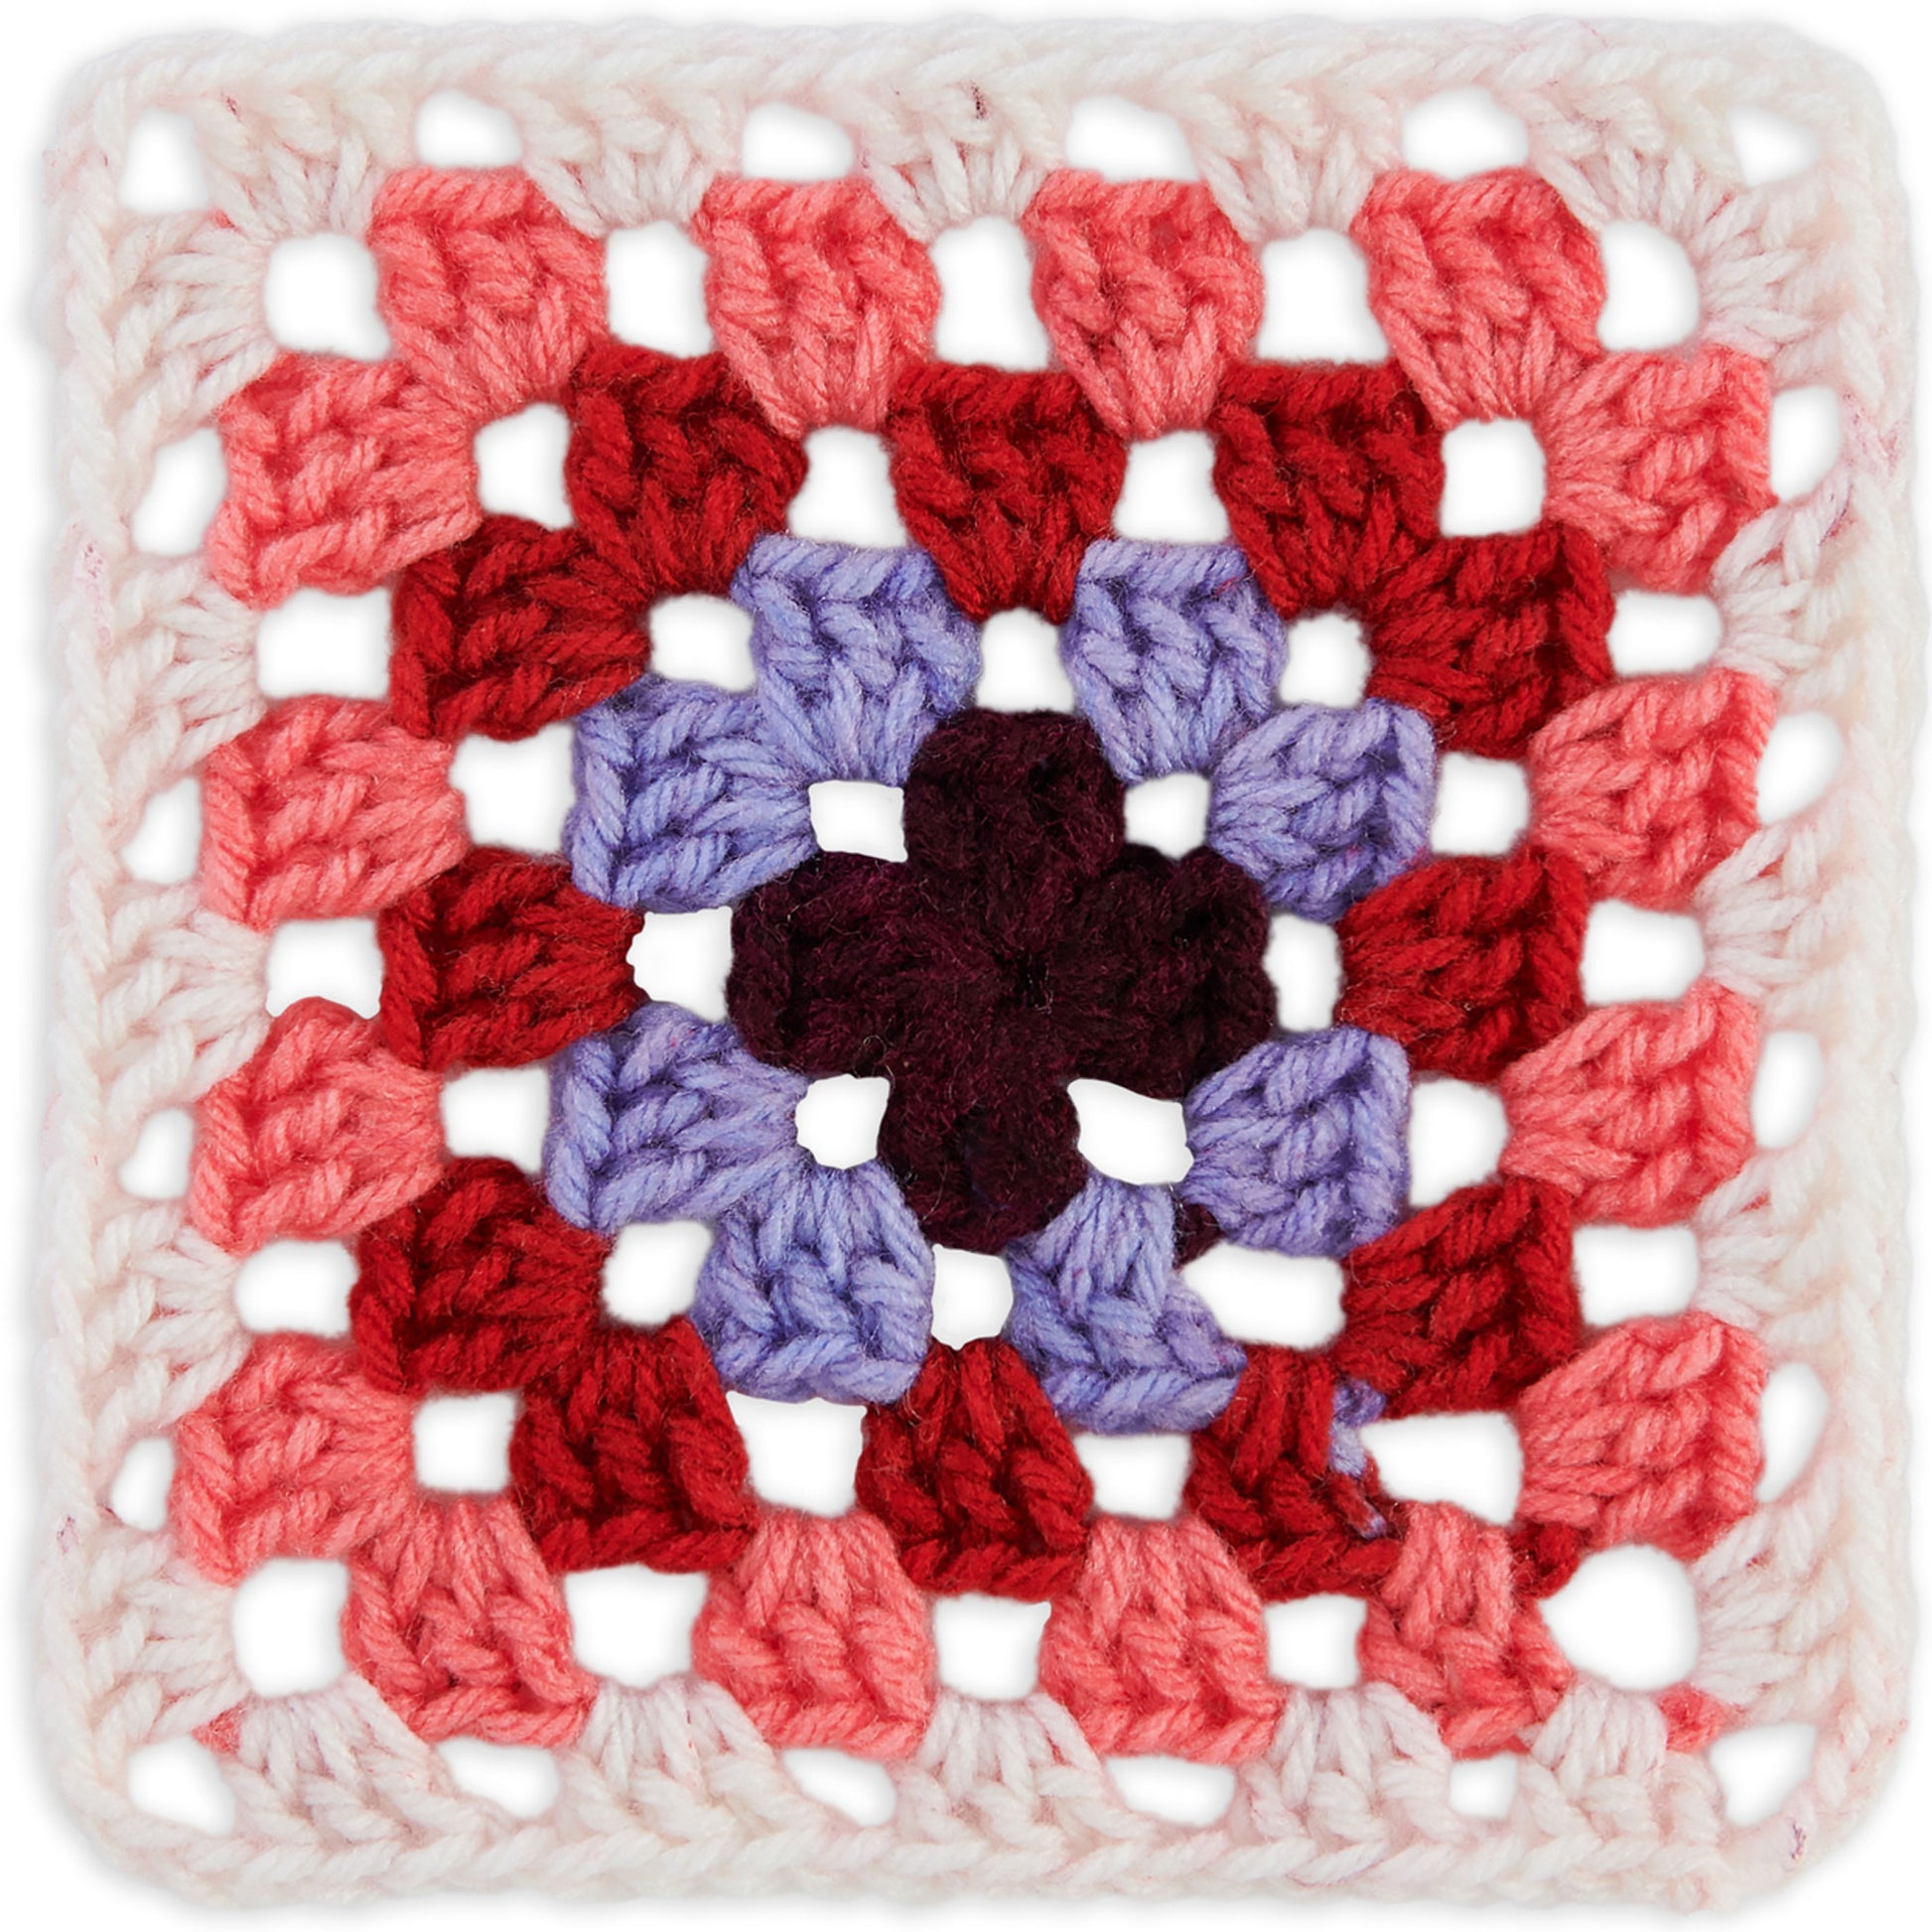 Red Heart All In One Granny Square Yarn (250g/8.8oz) Soft  White - Hot Stuff